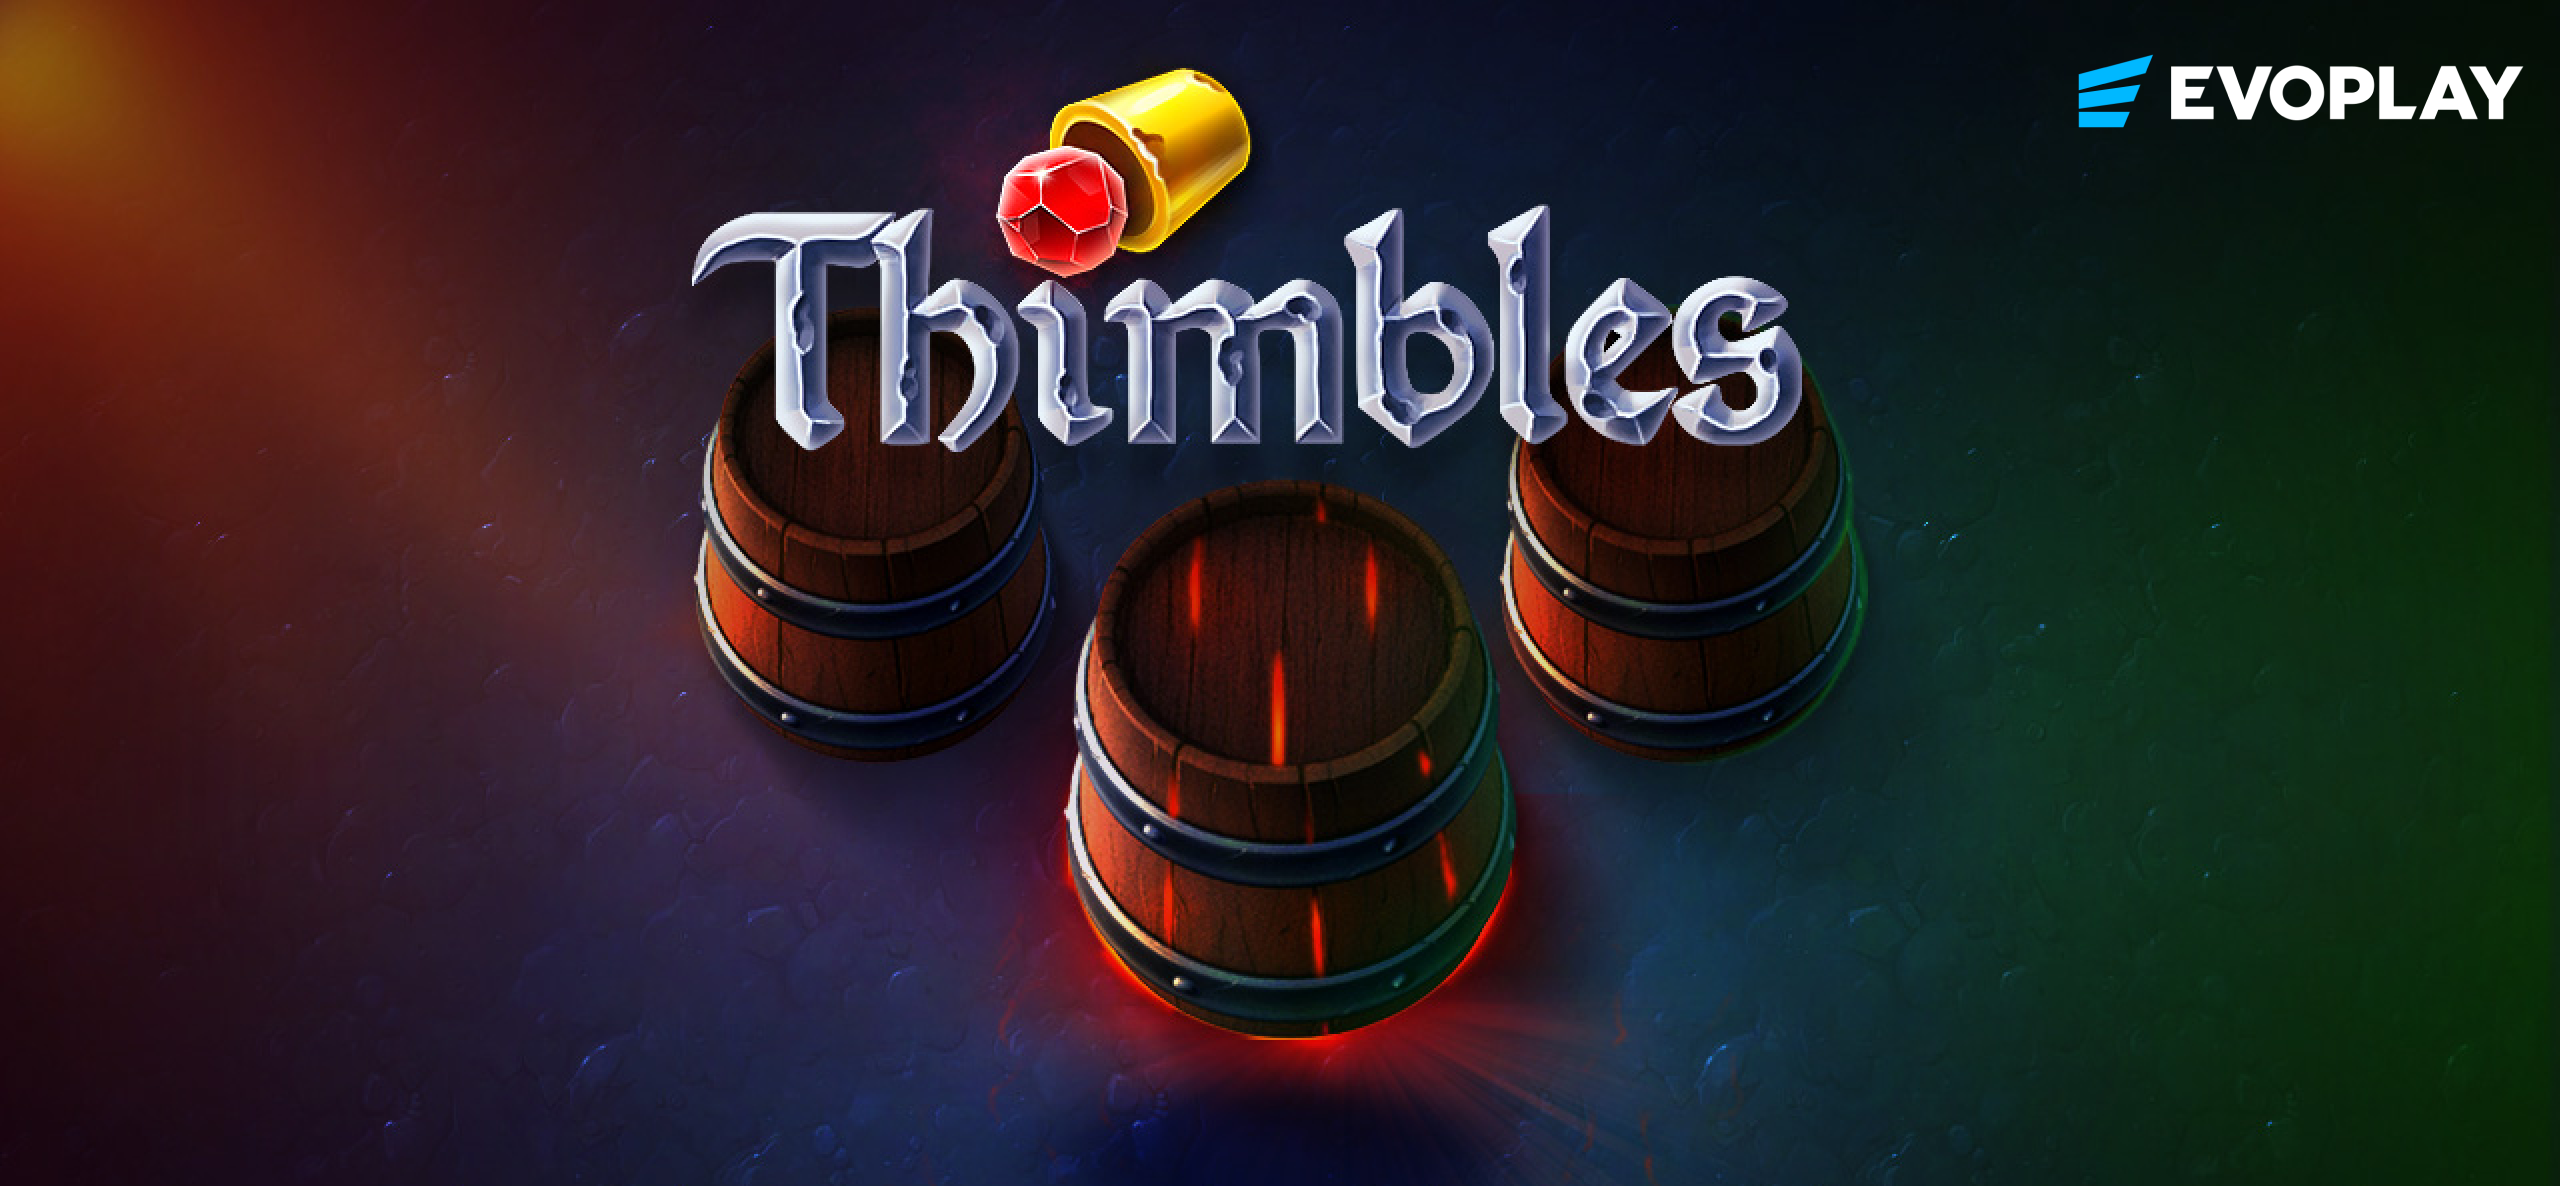 Thimbles by Evoplay